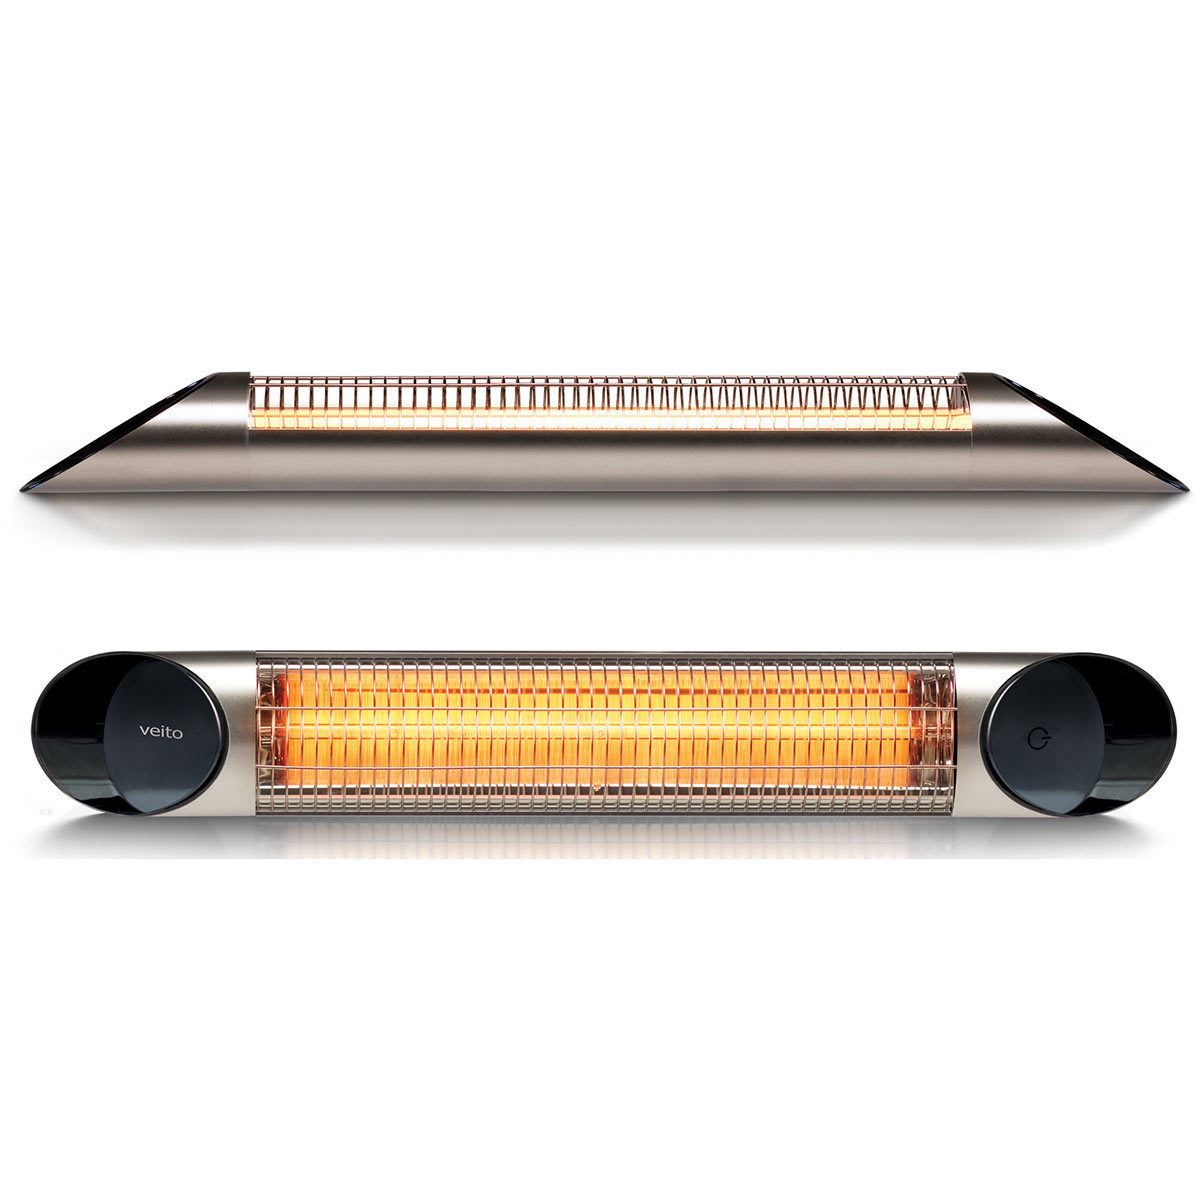 Veito Blade 2000 Carbon infrared heater Silver front and side veiw